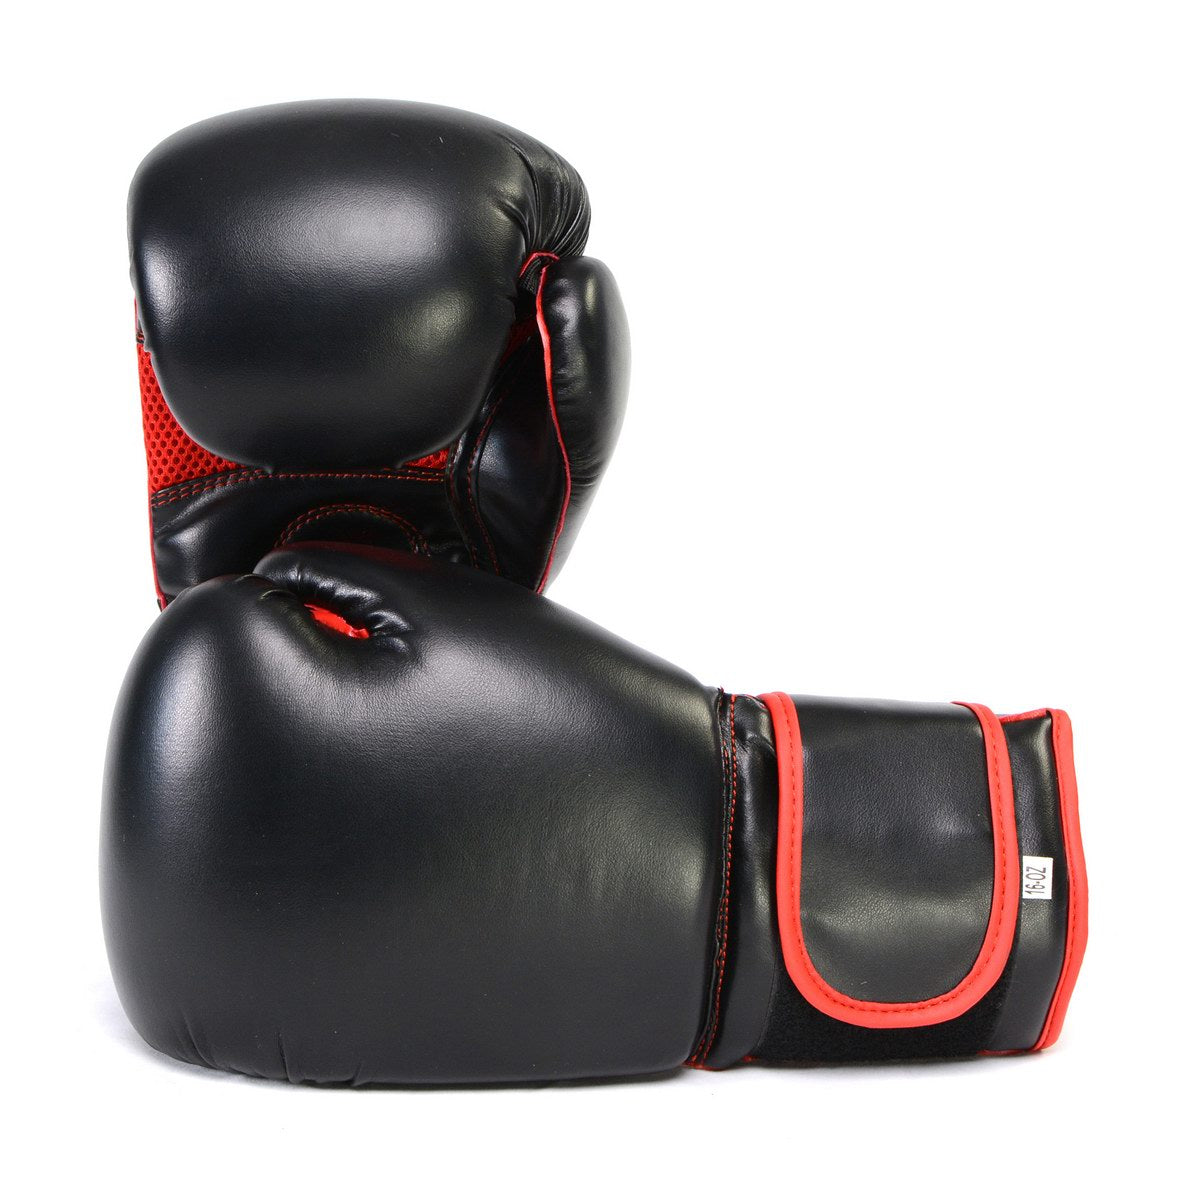 X-Fitness XF2000 Gel Boxing Kickboxing Punching Bag Gloves-BLK/RED